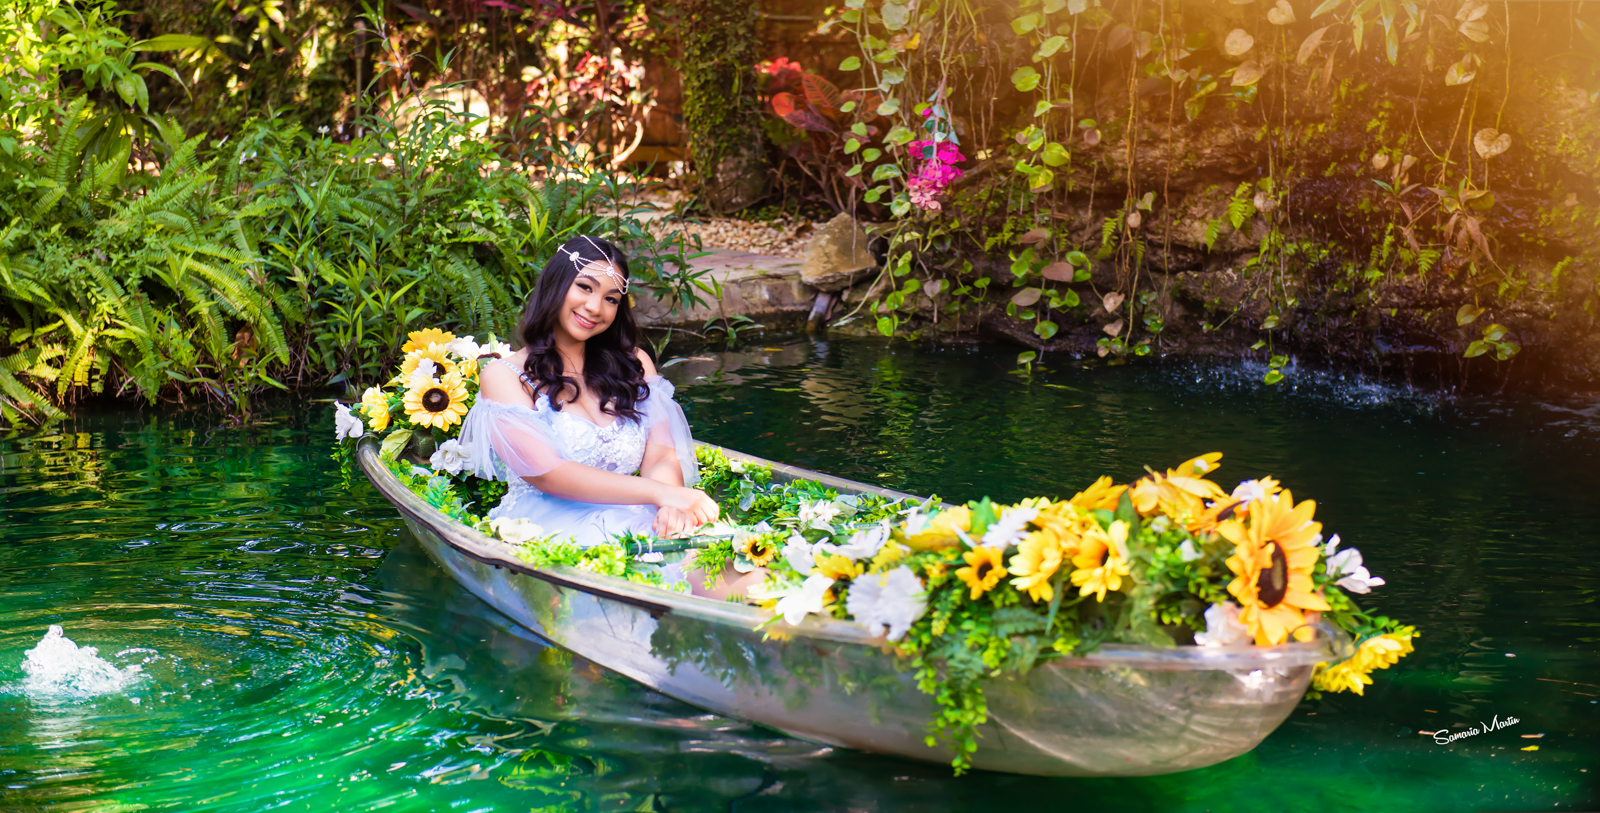 Water dress rental,Miami quince photography ,Quinceanera photoshoot ideas